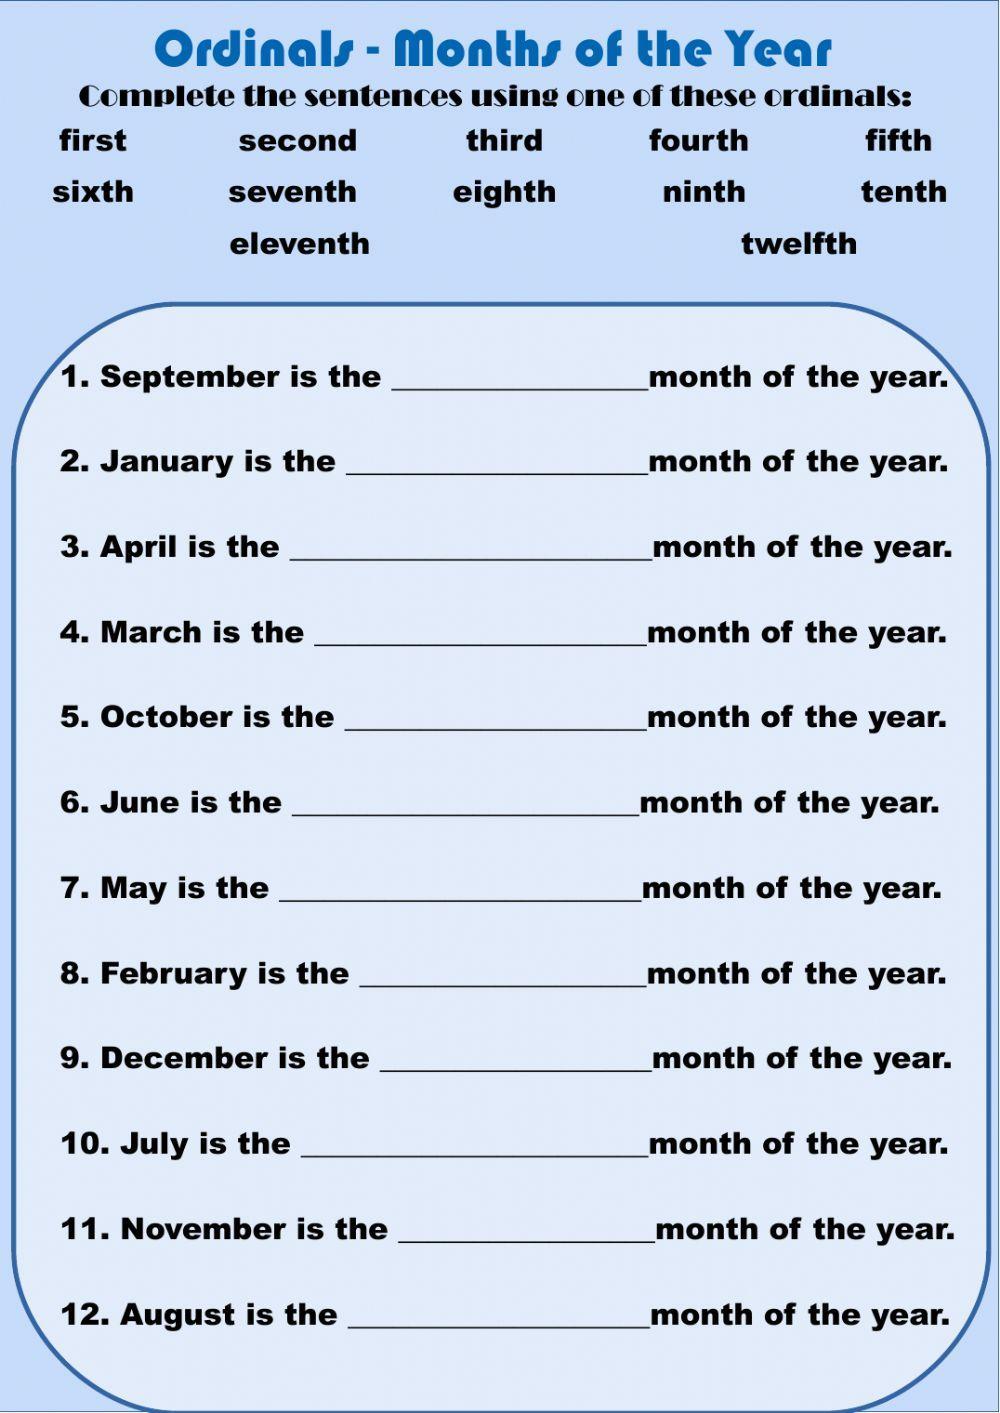 Ordinal numbers - Months